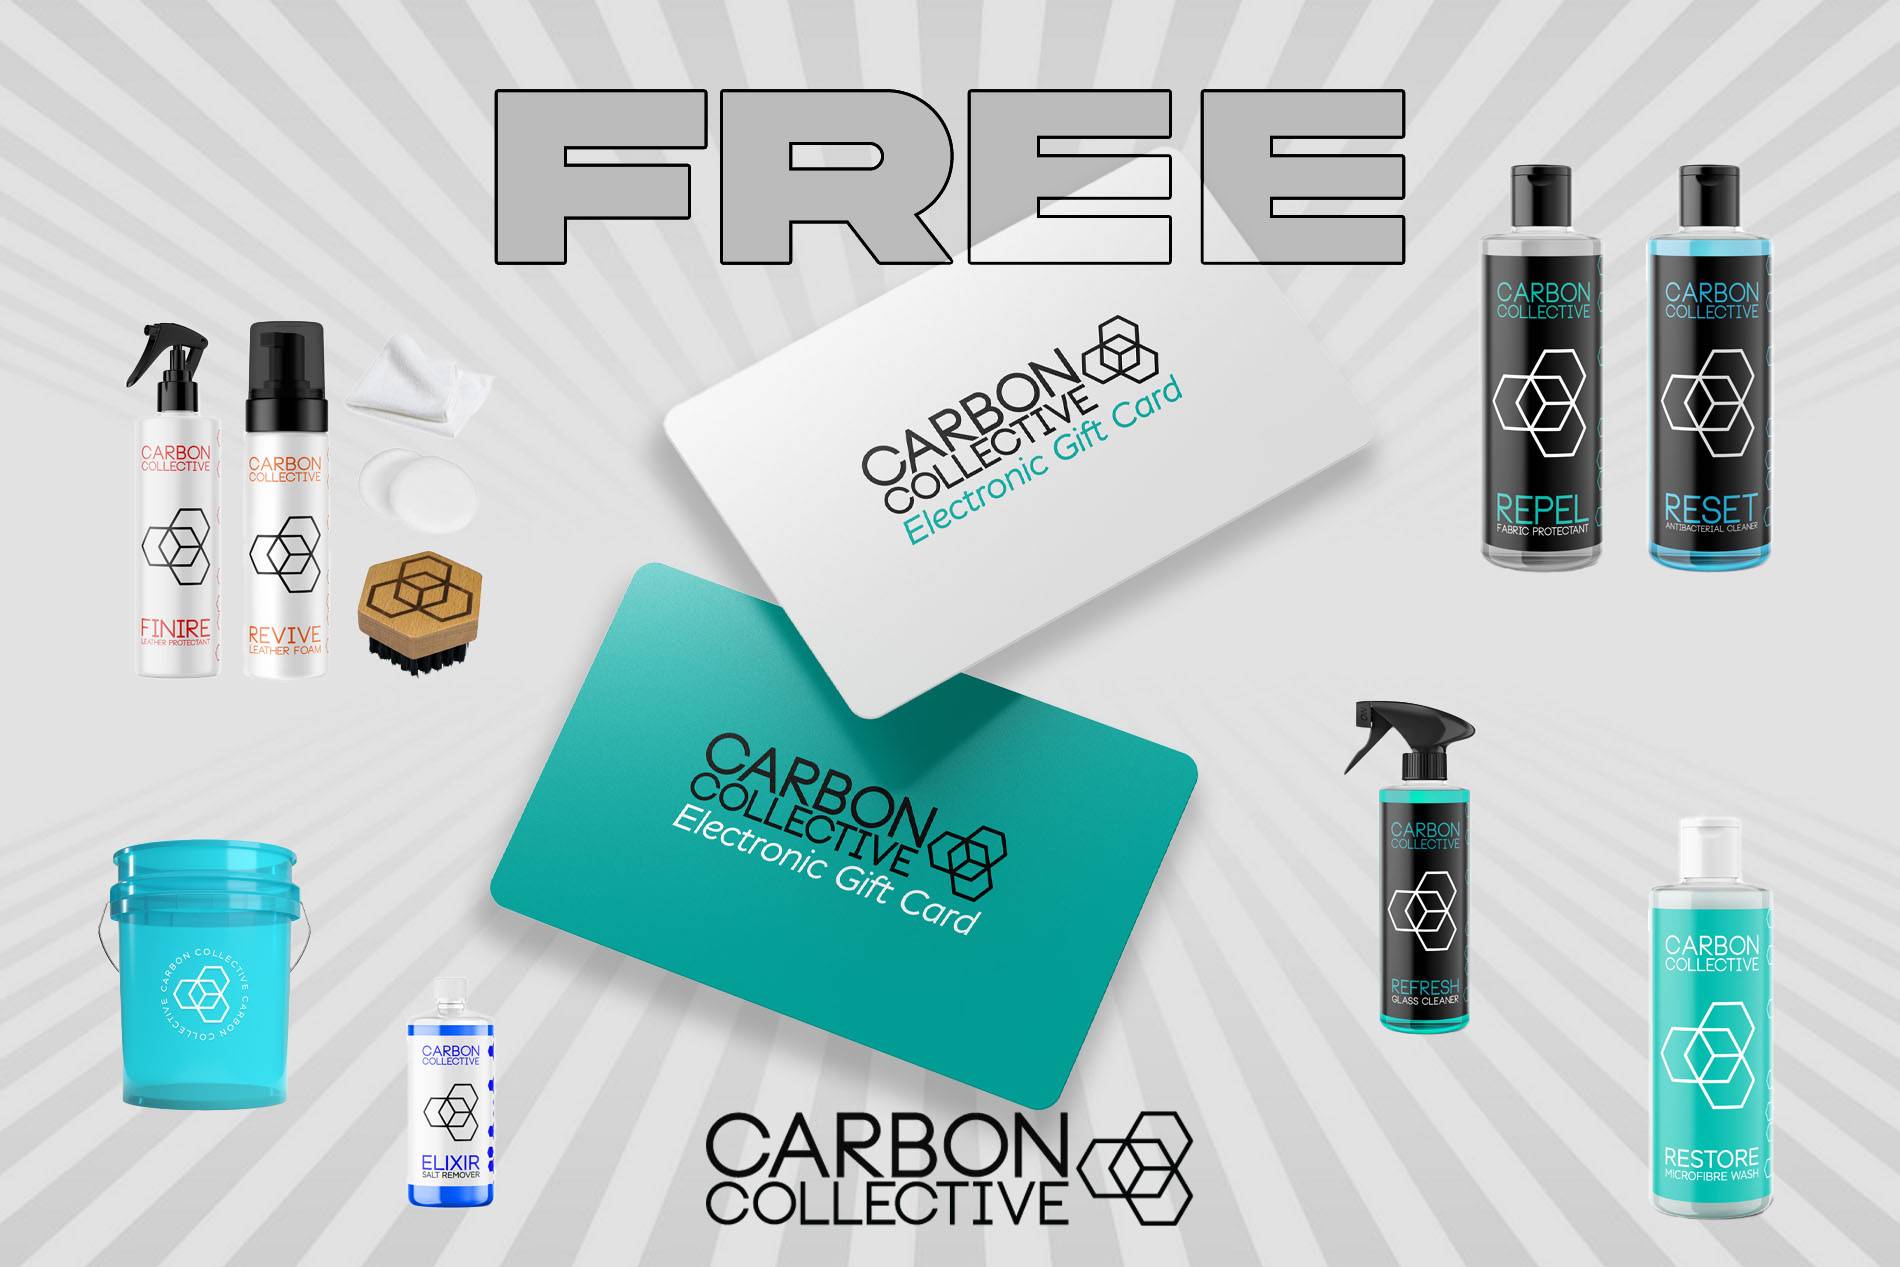 FREE: Chance to Win £100 Carbon Collective Voucher (Prize Triples Over £1 Spend)